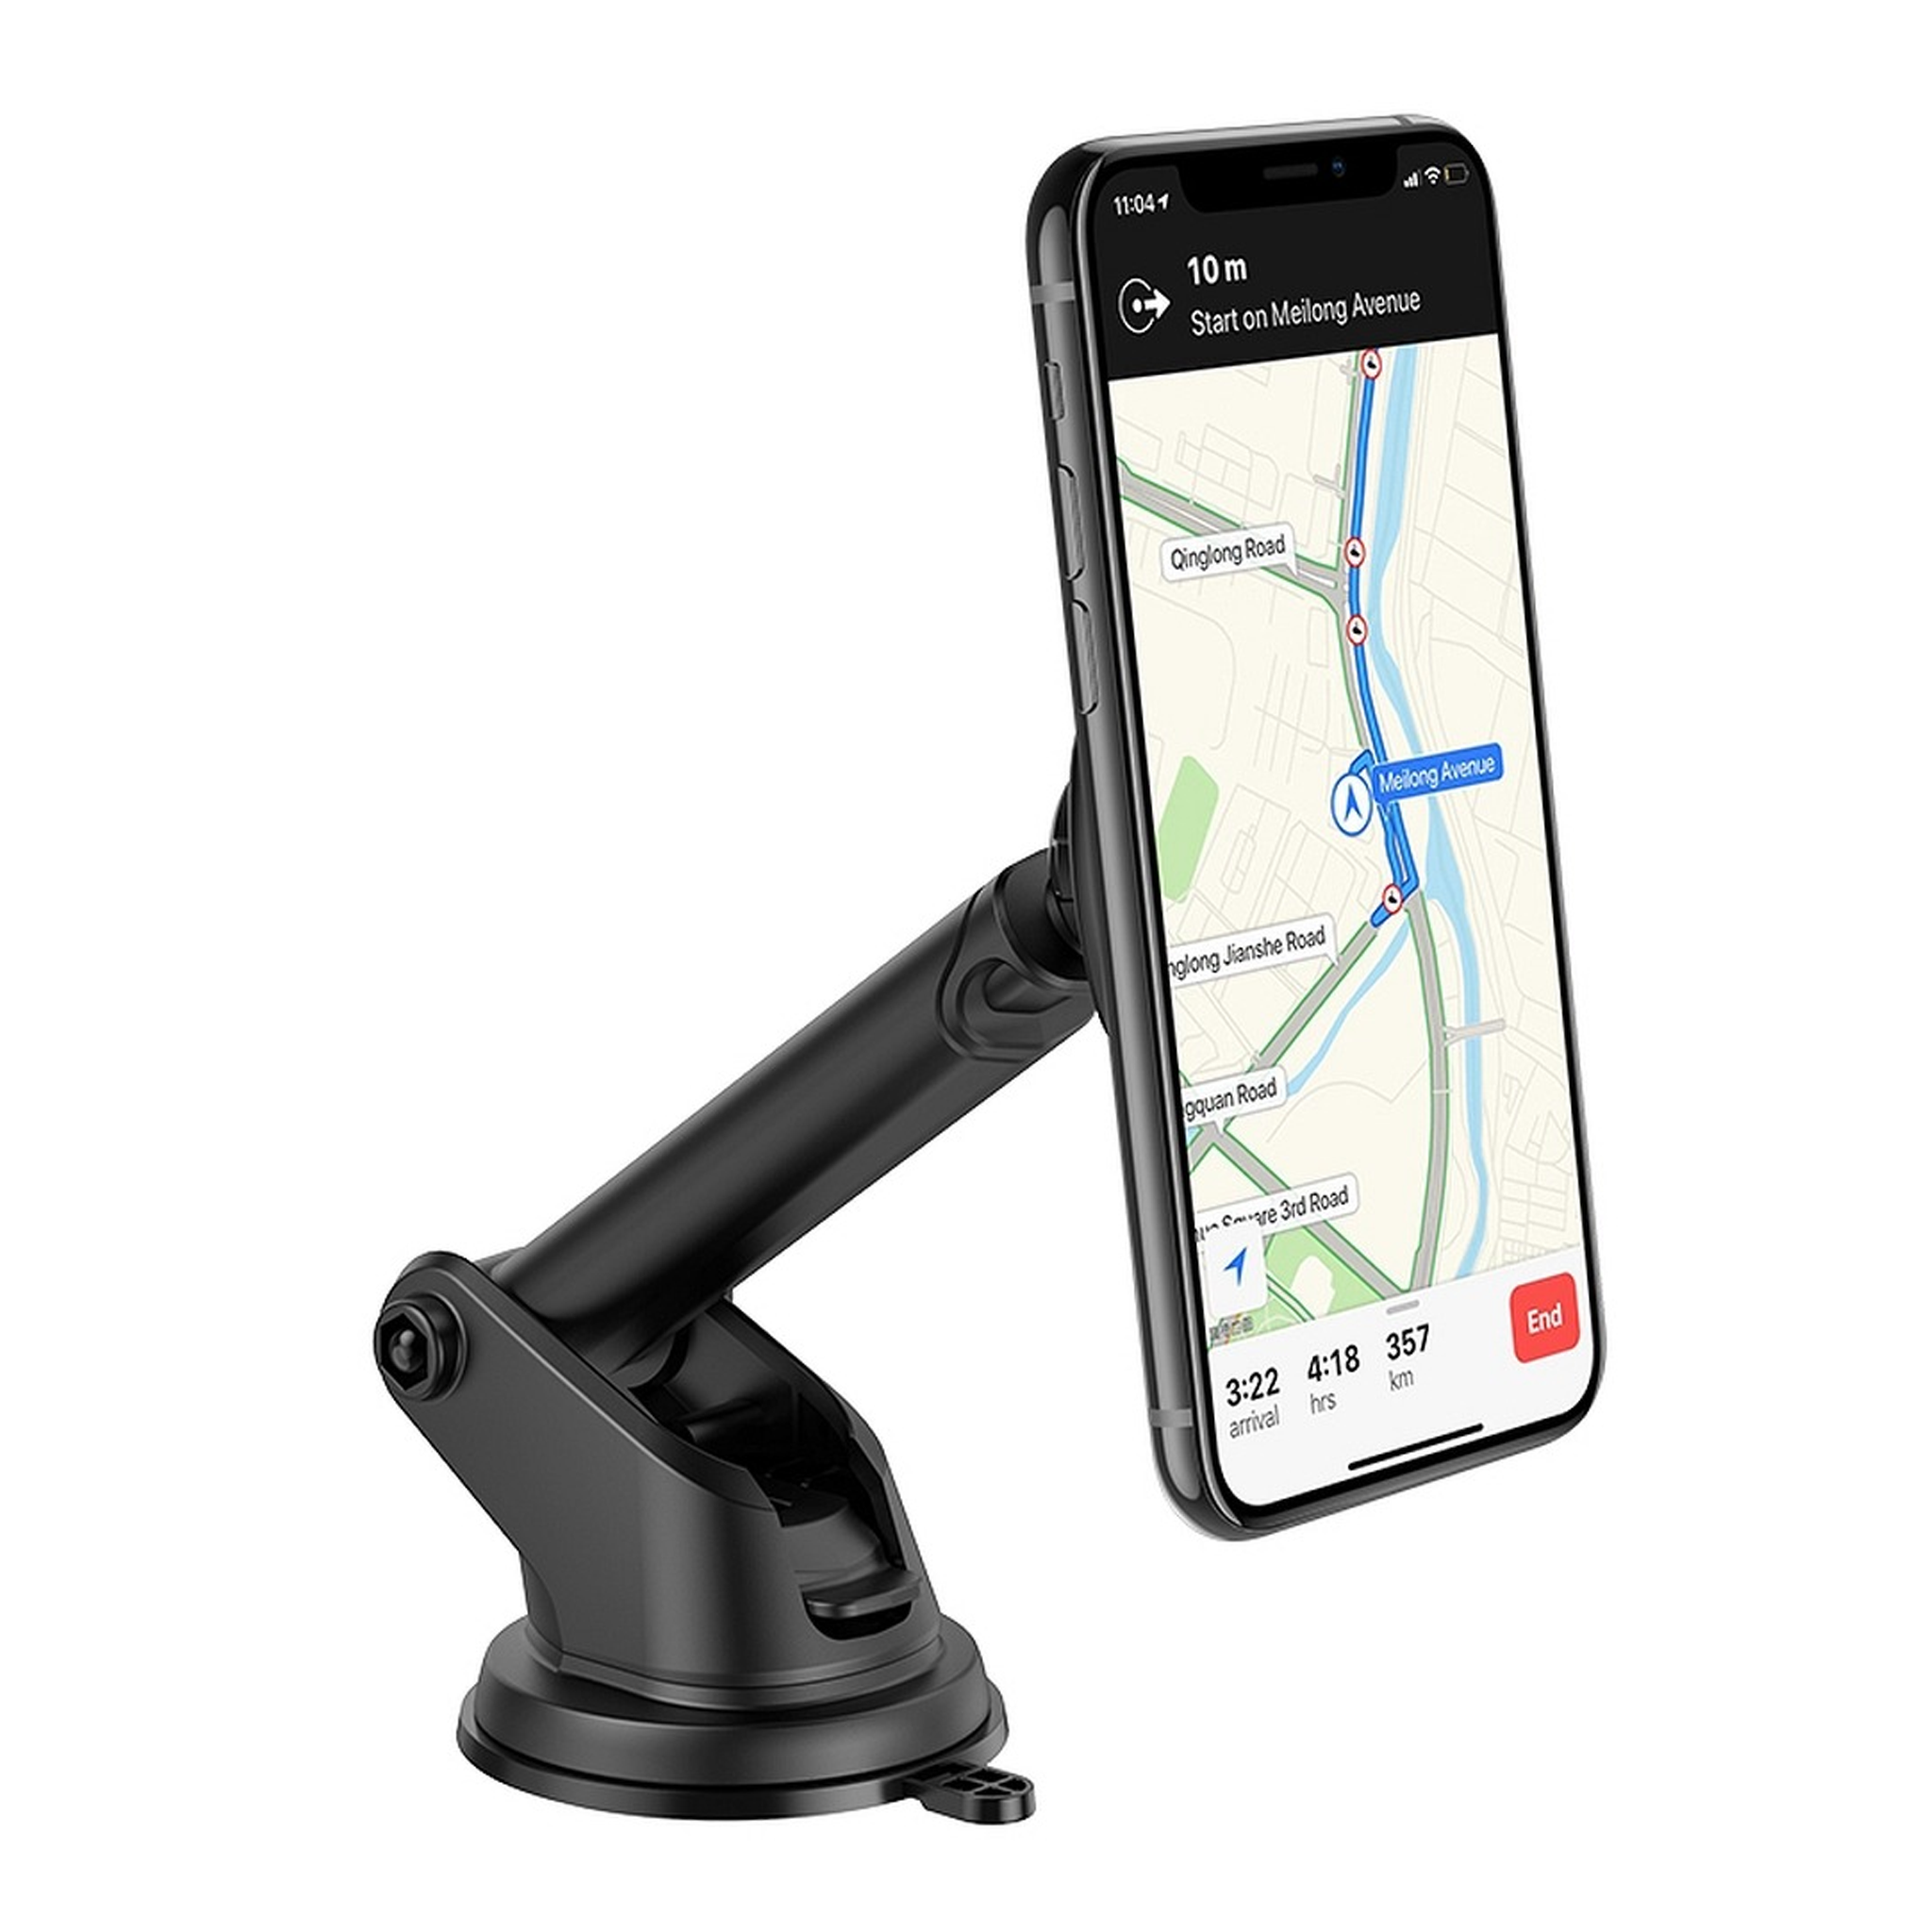 BUY Telescopic mobile holder IN QATAR | HOME DELIVERY WITH COD ON ALL ORDERS ALL OVER QATAR FROM GETIT.QA